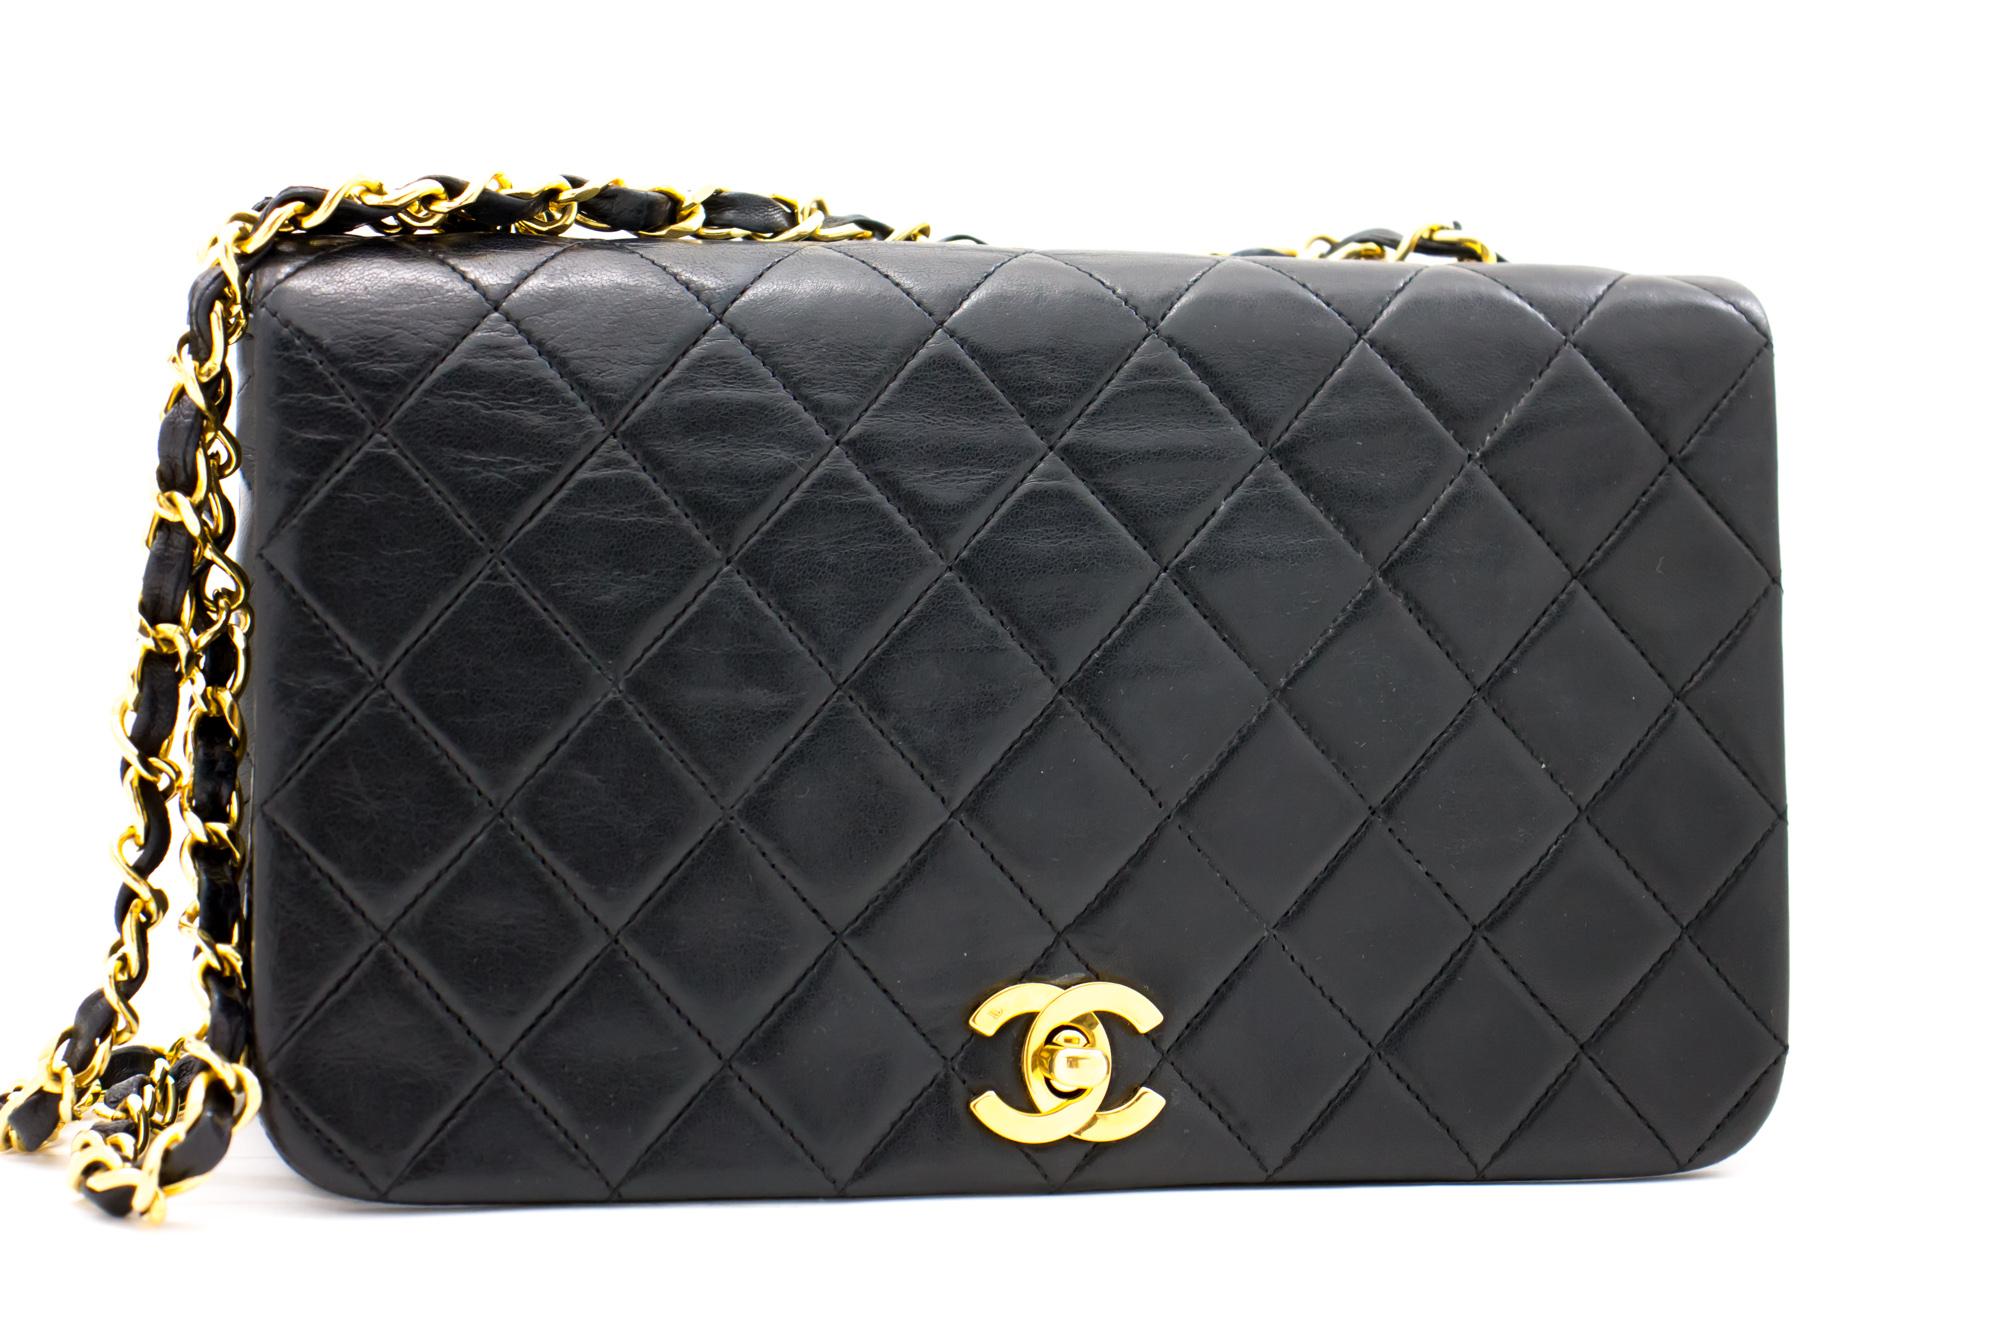 An authentic CHANEL Chain Shoulder Bag Black Quilted Flap made of black Lambskin Leather. The color is Black. The outside material is Leather. The pattern is Solid. This item is Vintage / Classic. The year of manufacture would be